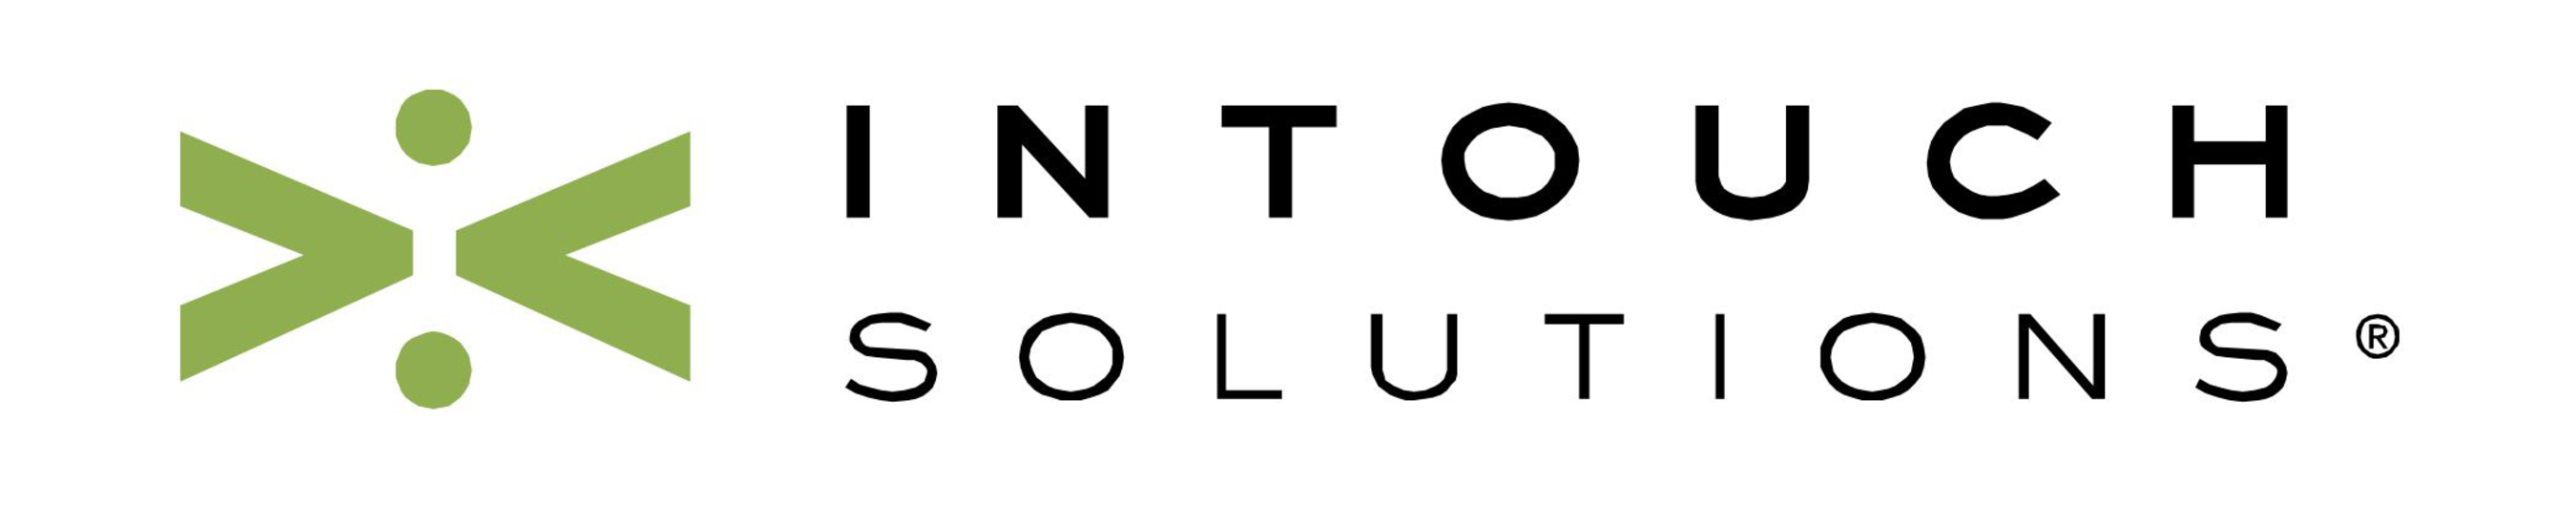 Intouch Solutions logo.